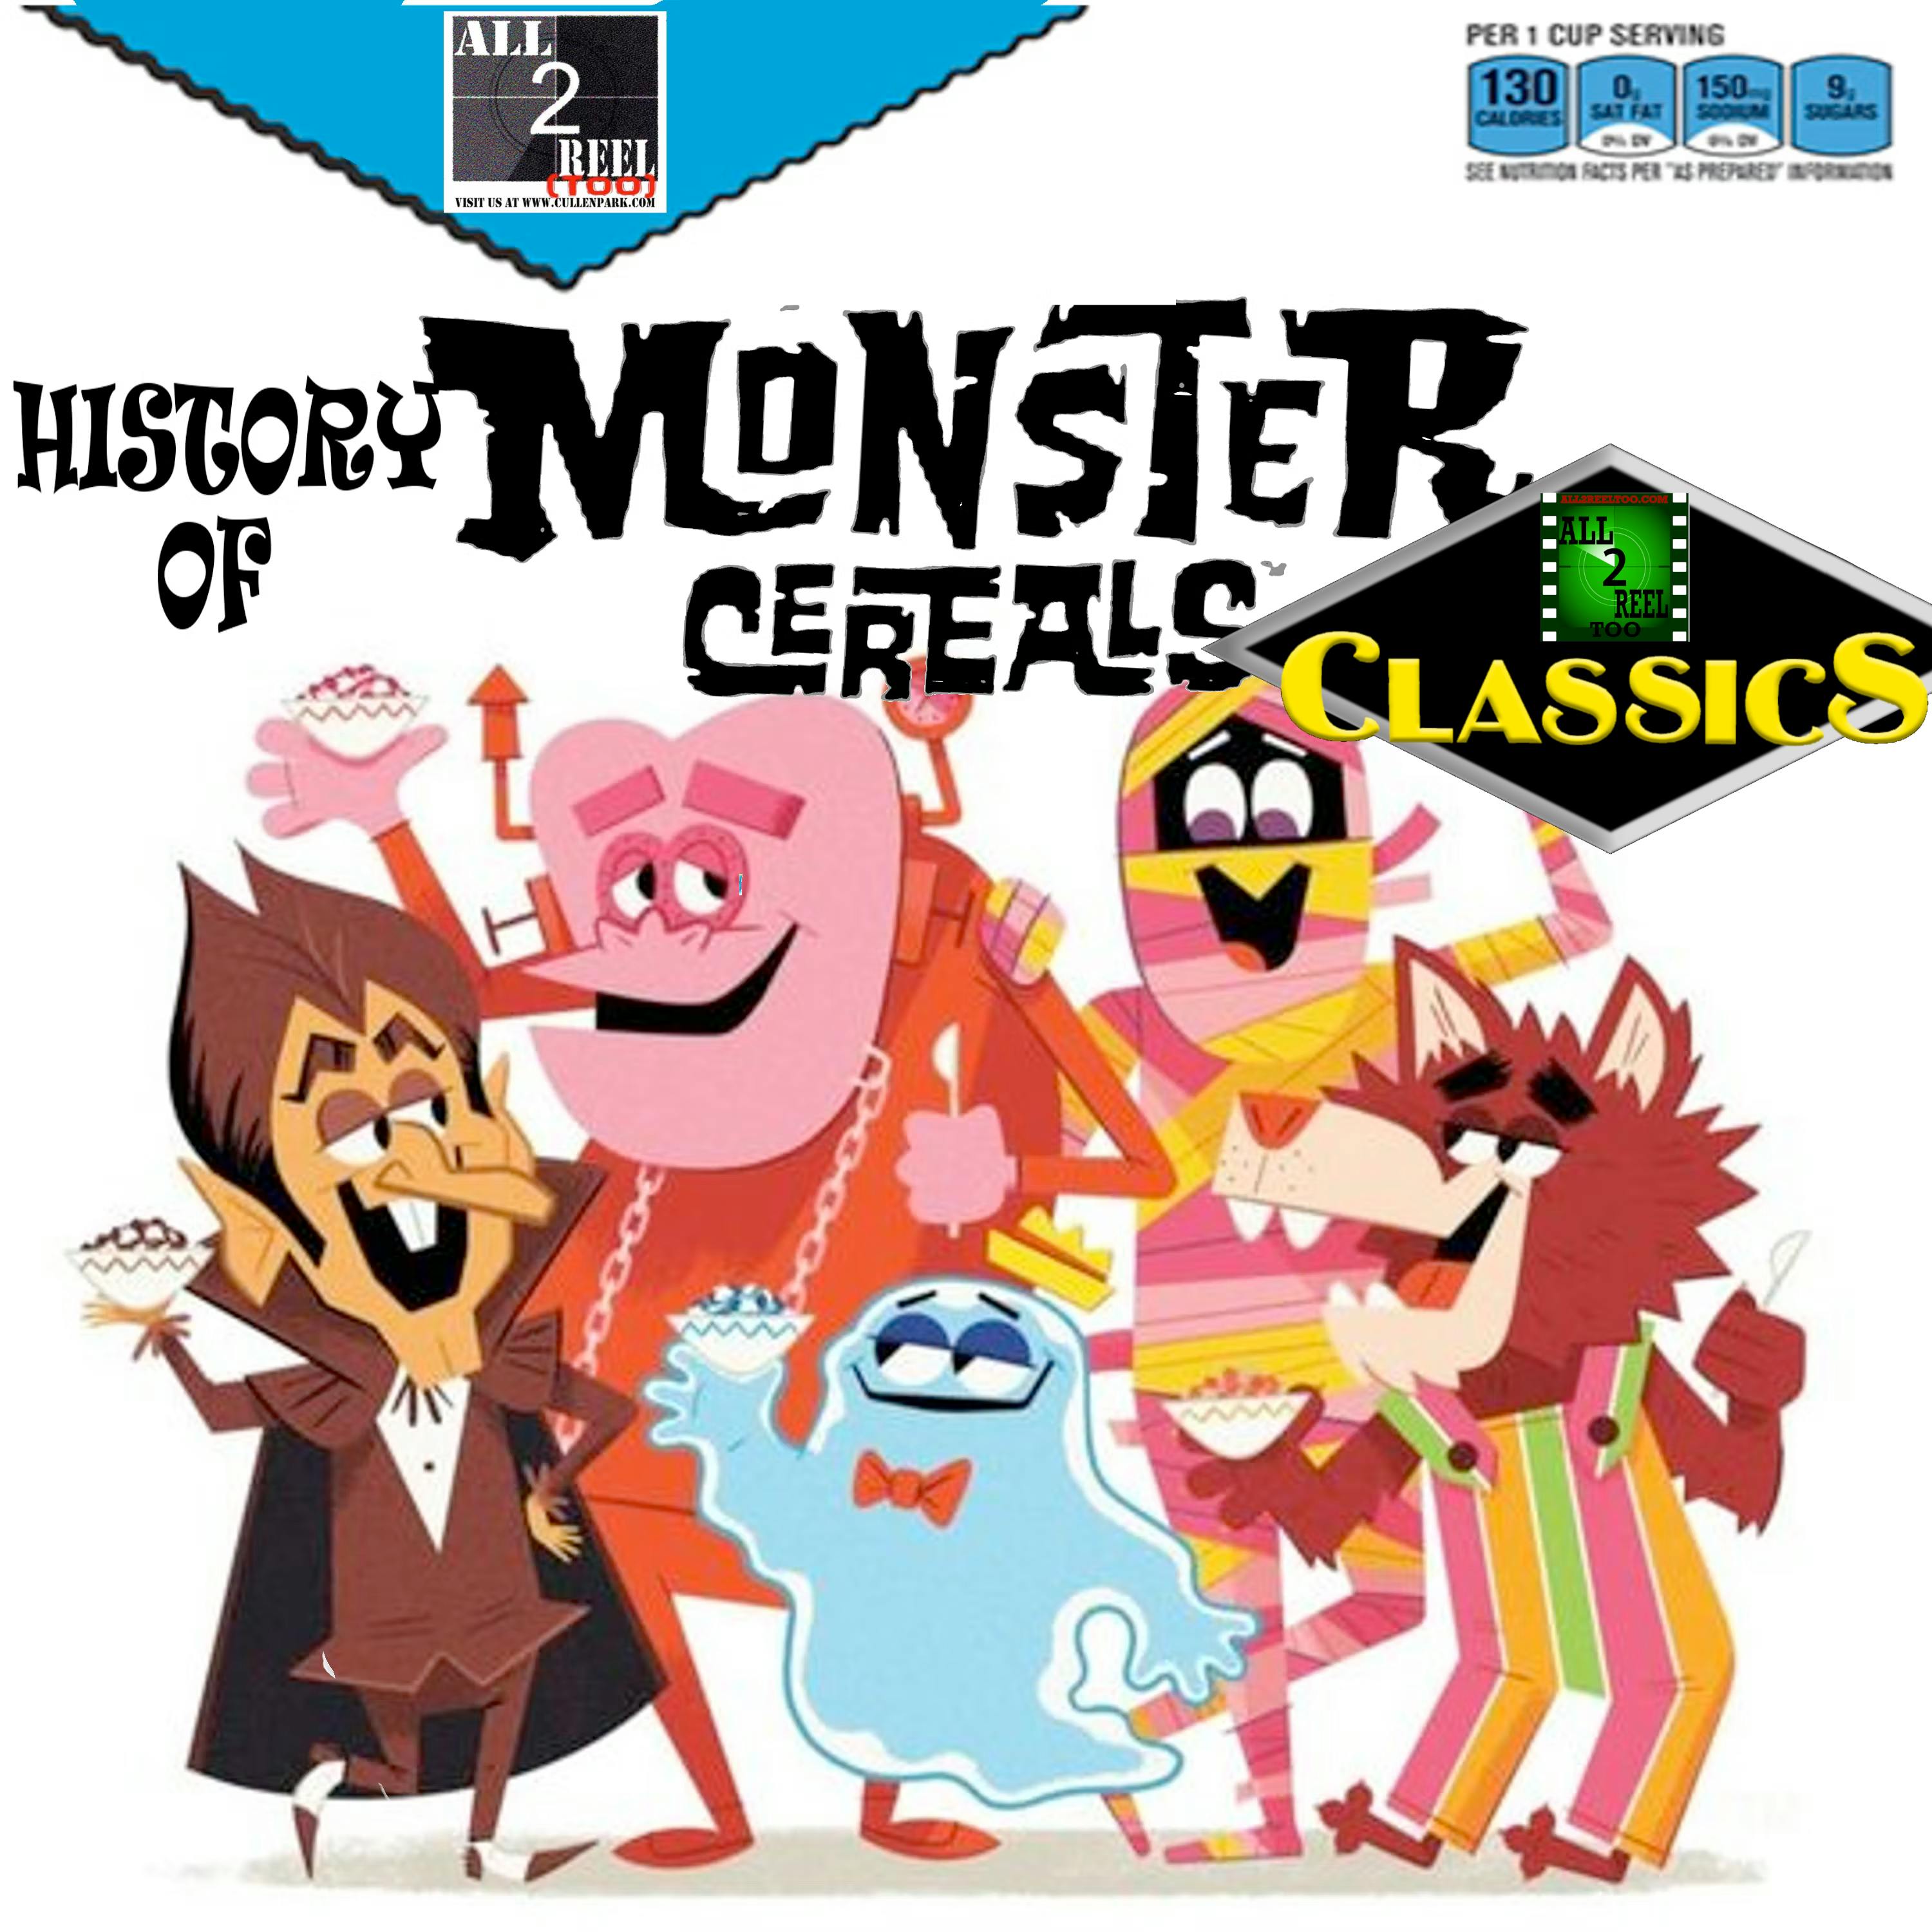 ALL2REELTOO CLASSICS -  HISTORY OF MONSTER CEREALS Image